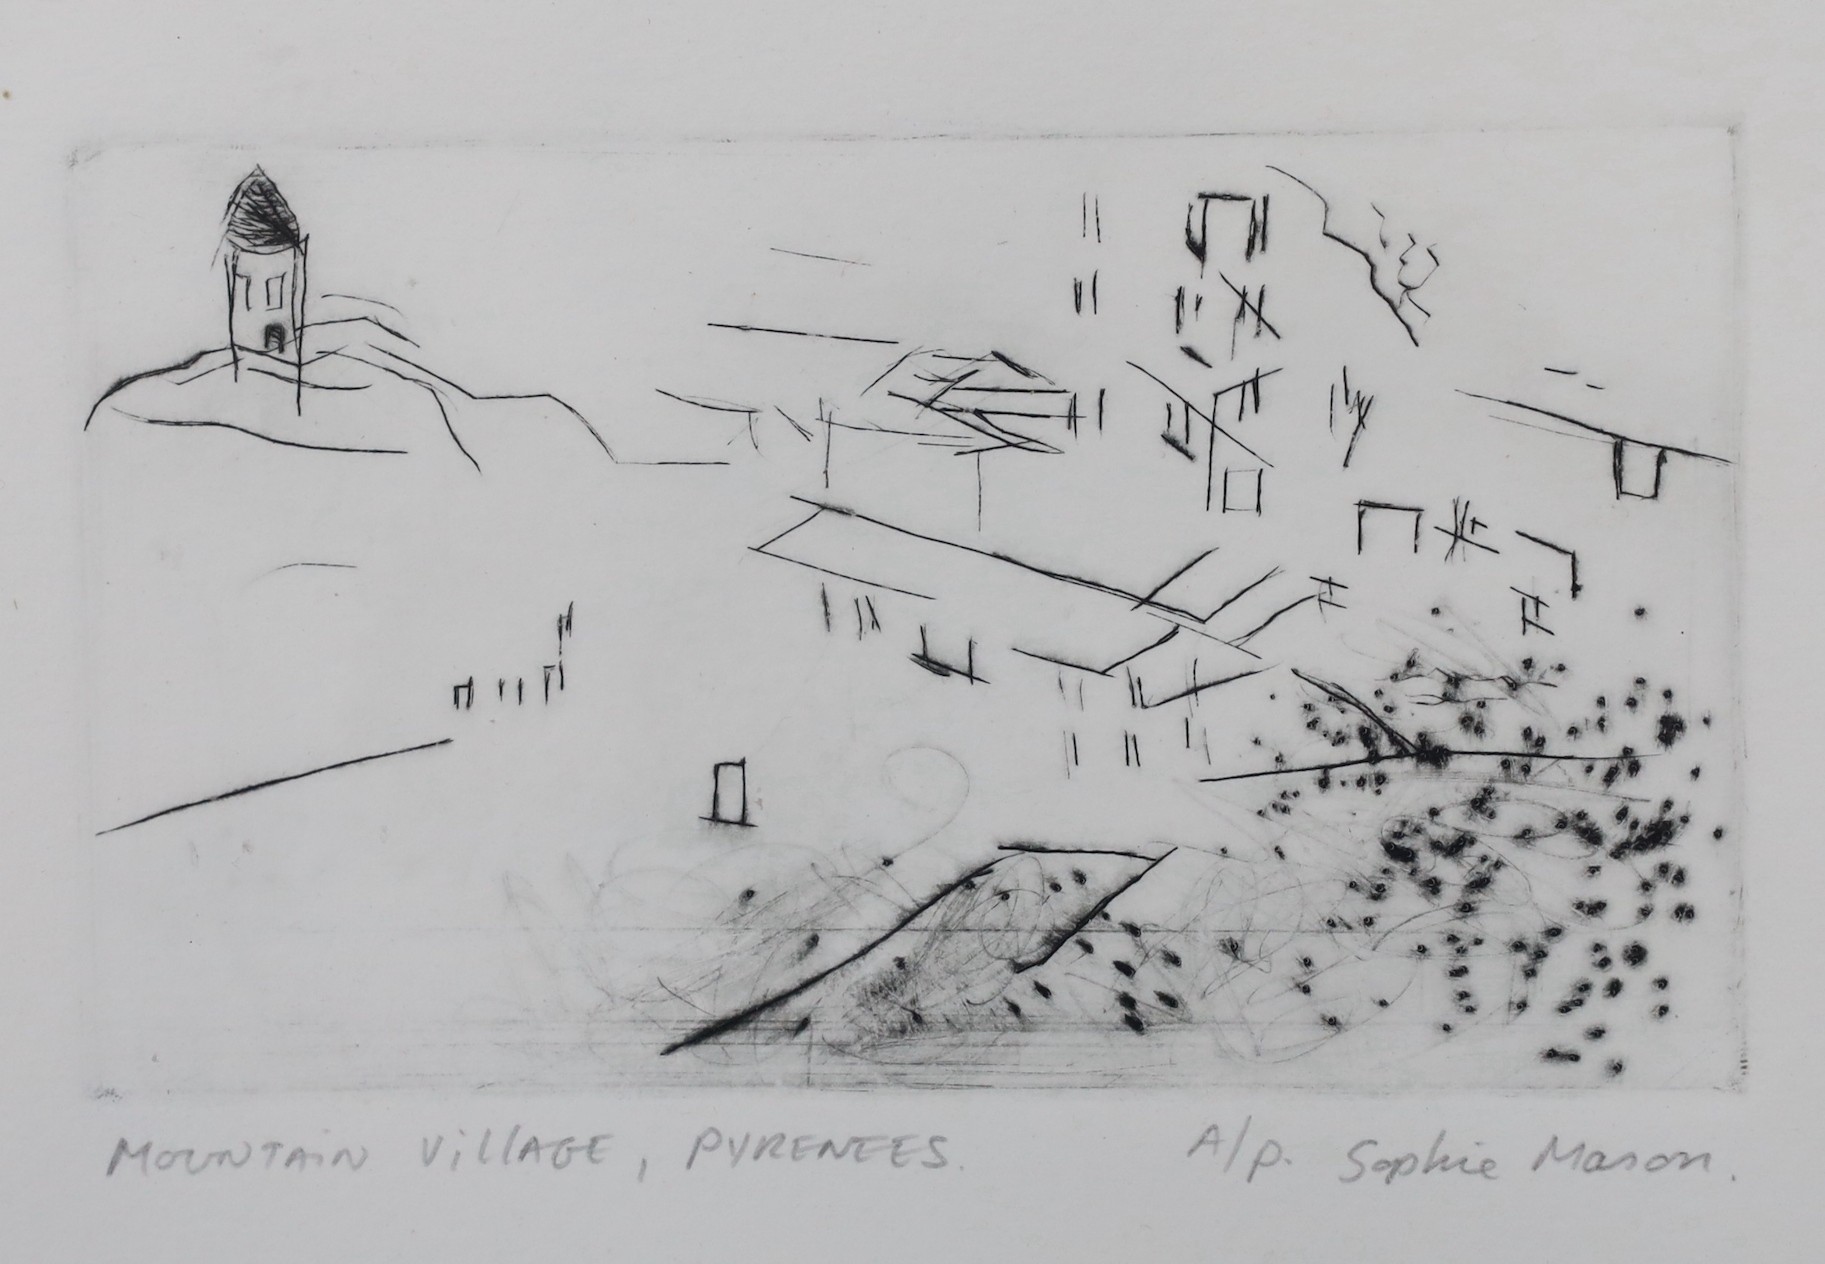 Sophie Mason, contemporary, artist proof etching, Mountain village, Pyrenees, signed and titled in